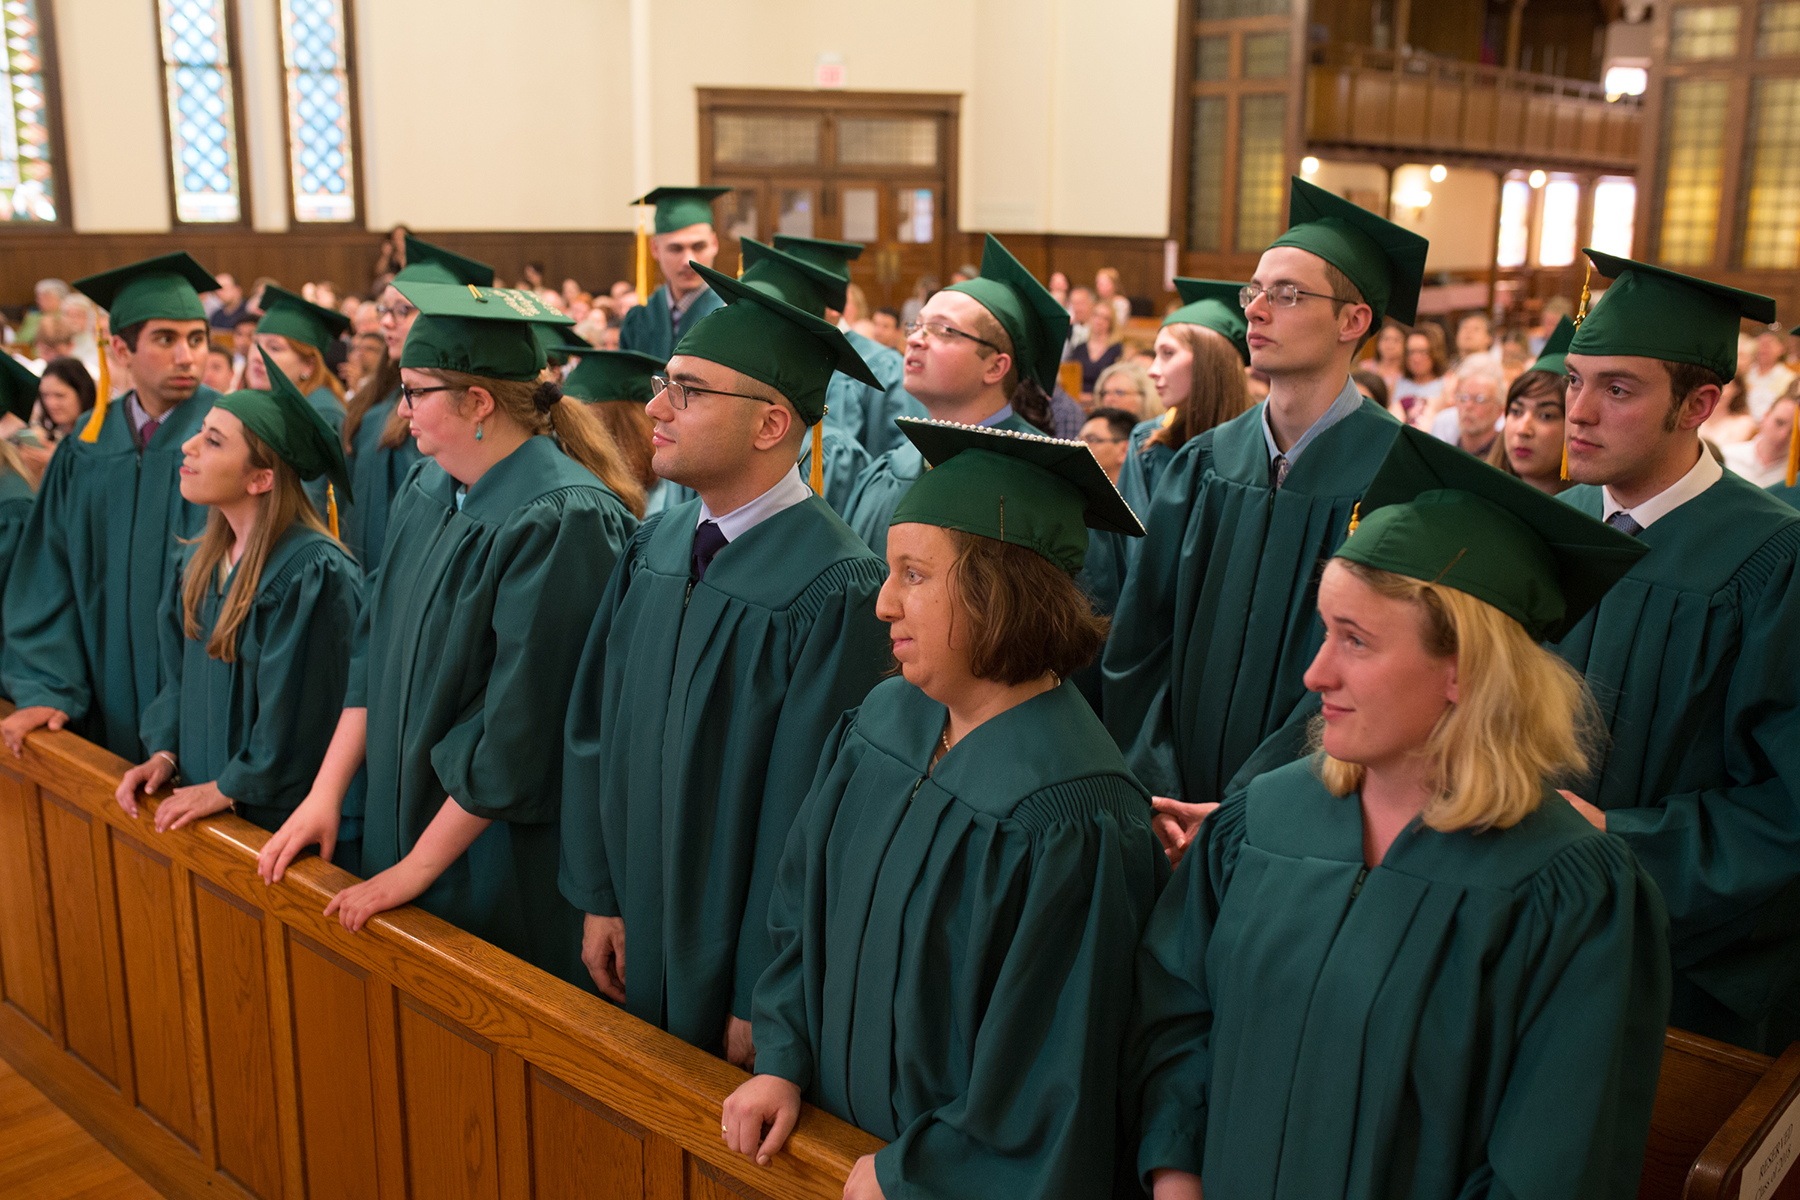 The Class of 2018 is pictured standing and listening during the graduation ceremony.